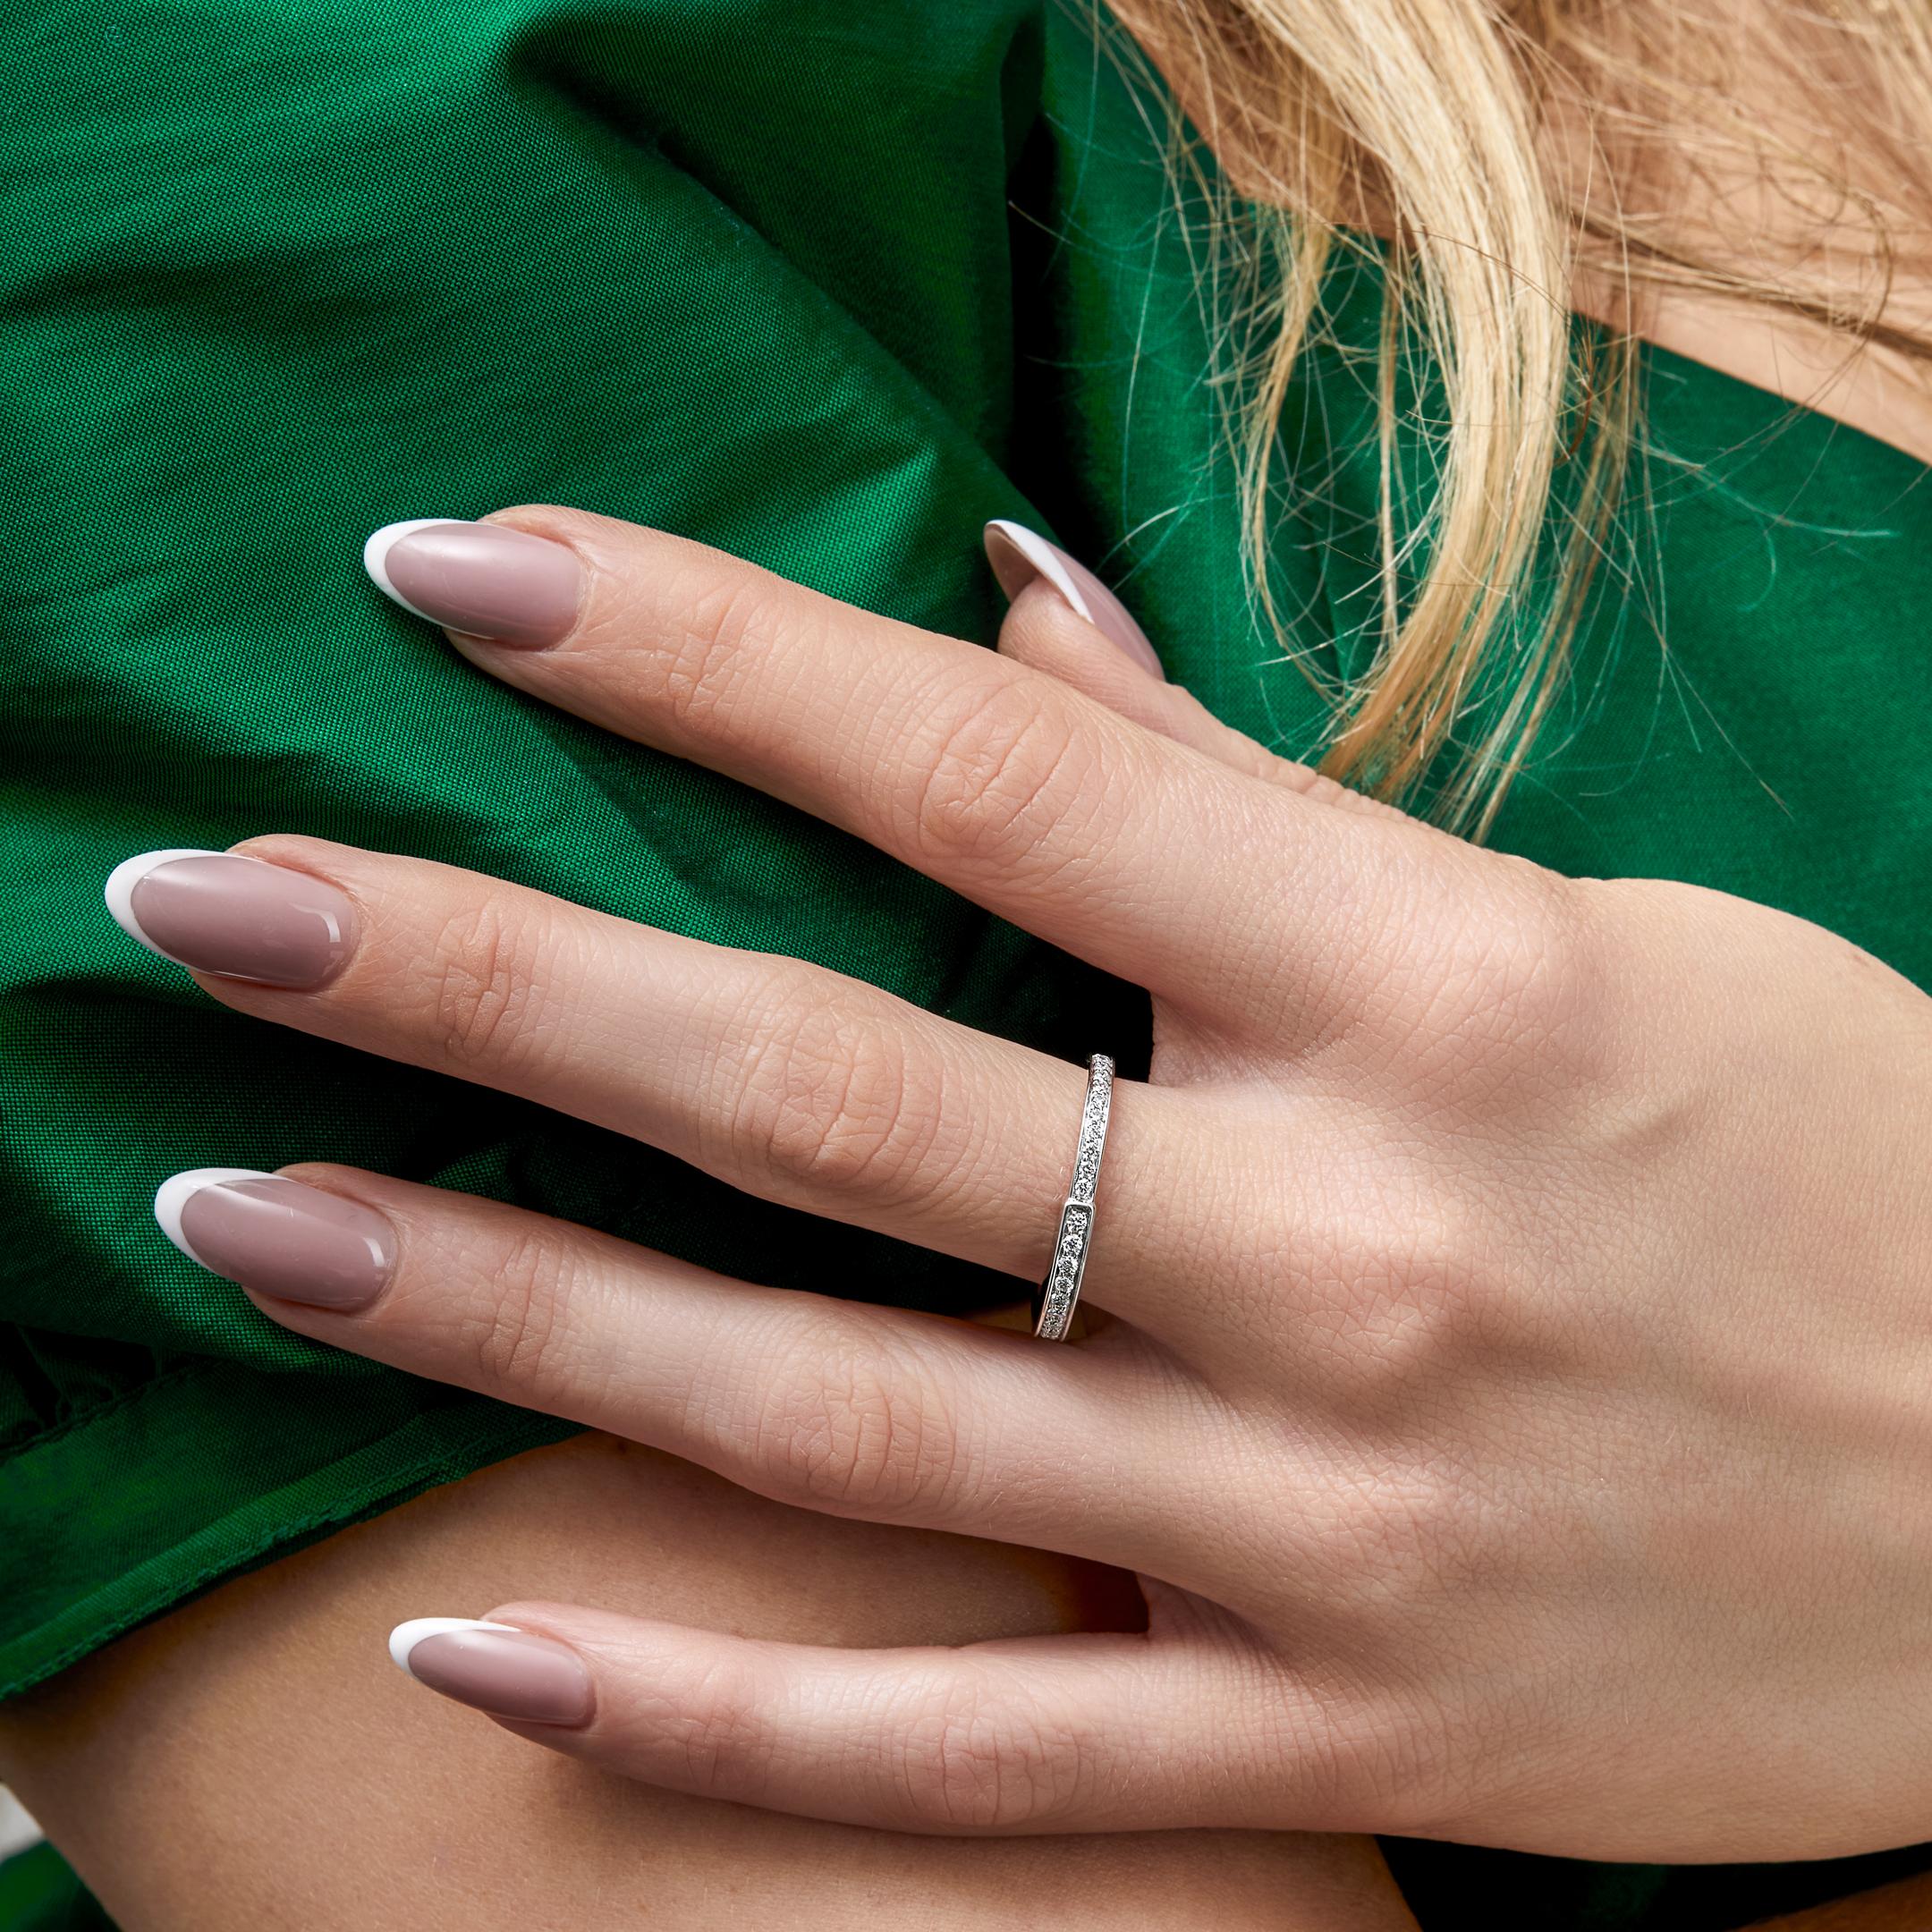 The Tiffany & Co. Lock ring is a bold symbol of unity and diversity, celebrating personal connections that shape us. Crafted in 18k white gold with round brilliant, this ring is a stylish choice whether worn alone or as part of your everyday ring